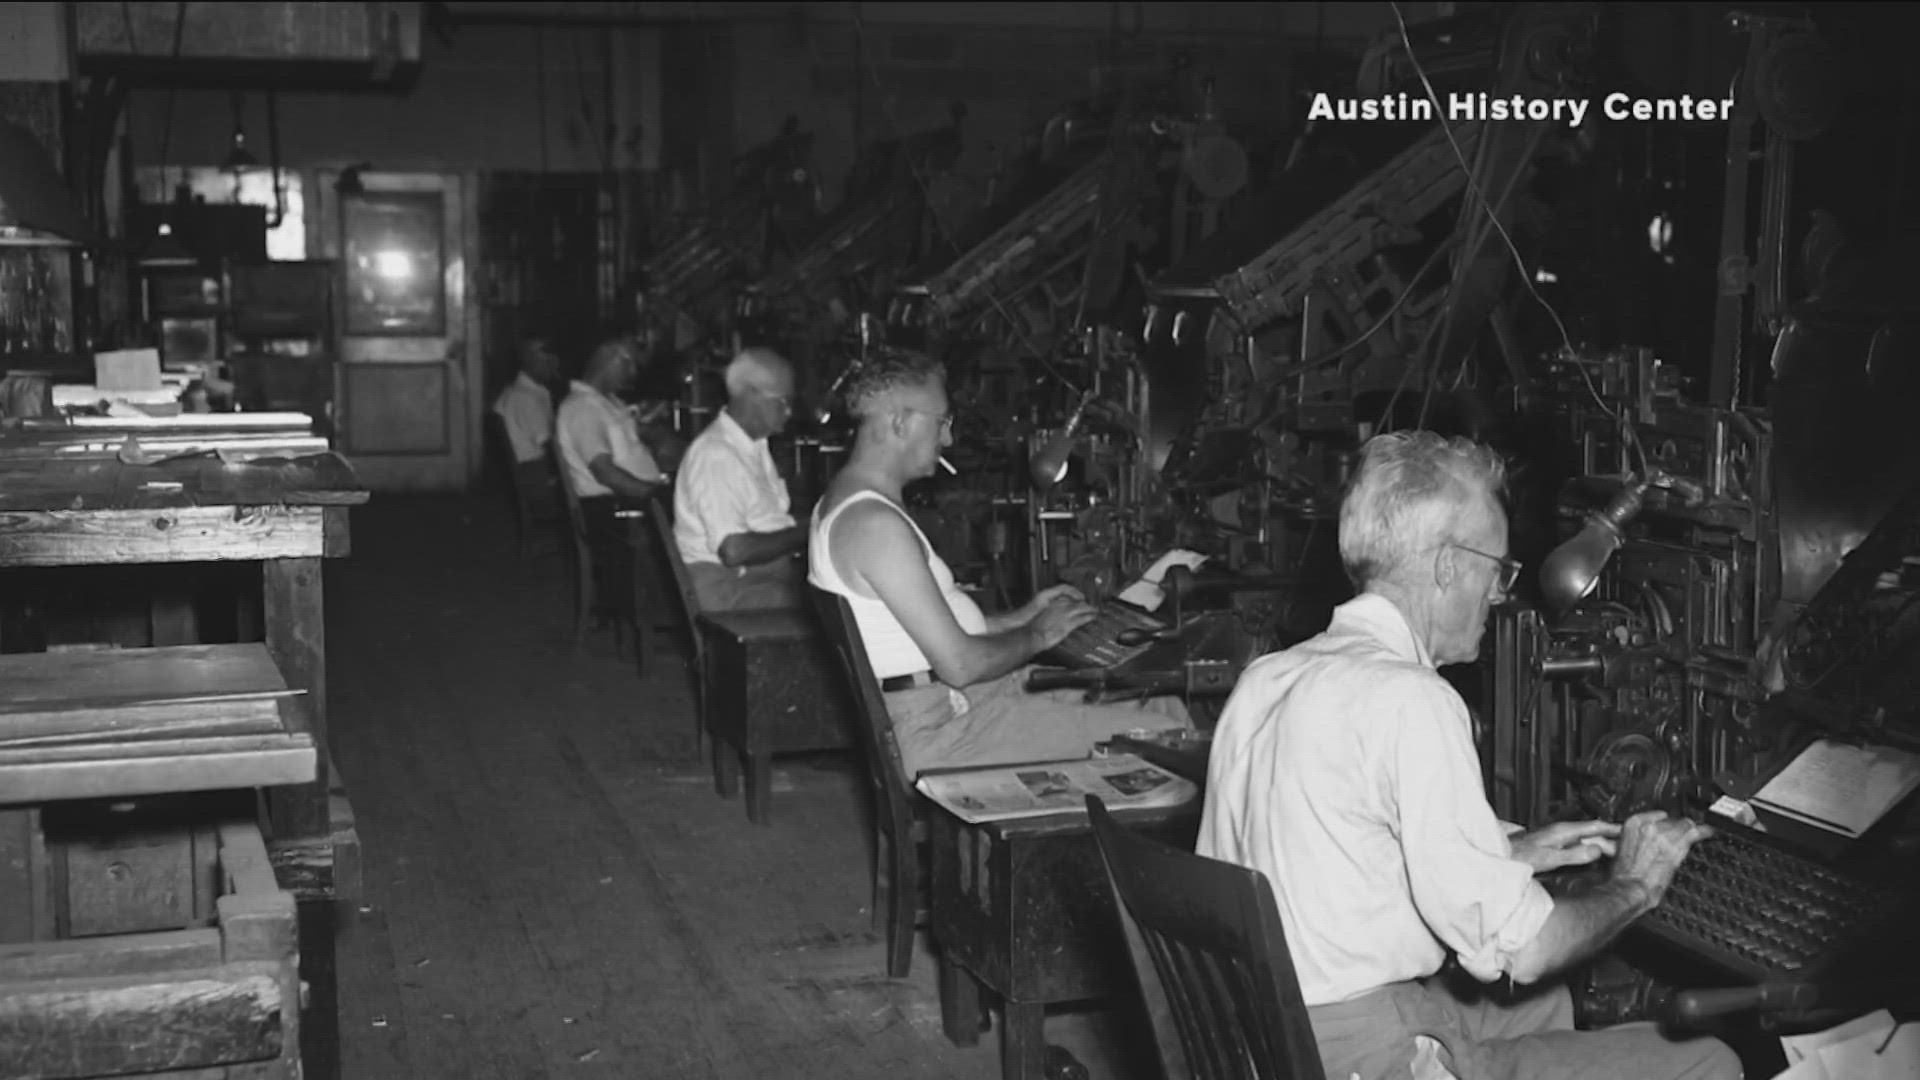 A labor dispute is the latest chapter in a long and interesting history of Austin's hometown daily newspaper. KVUE's Bob Buckalew has the Back Story.